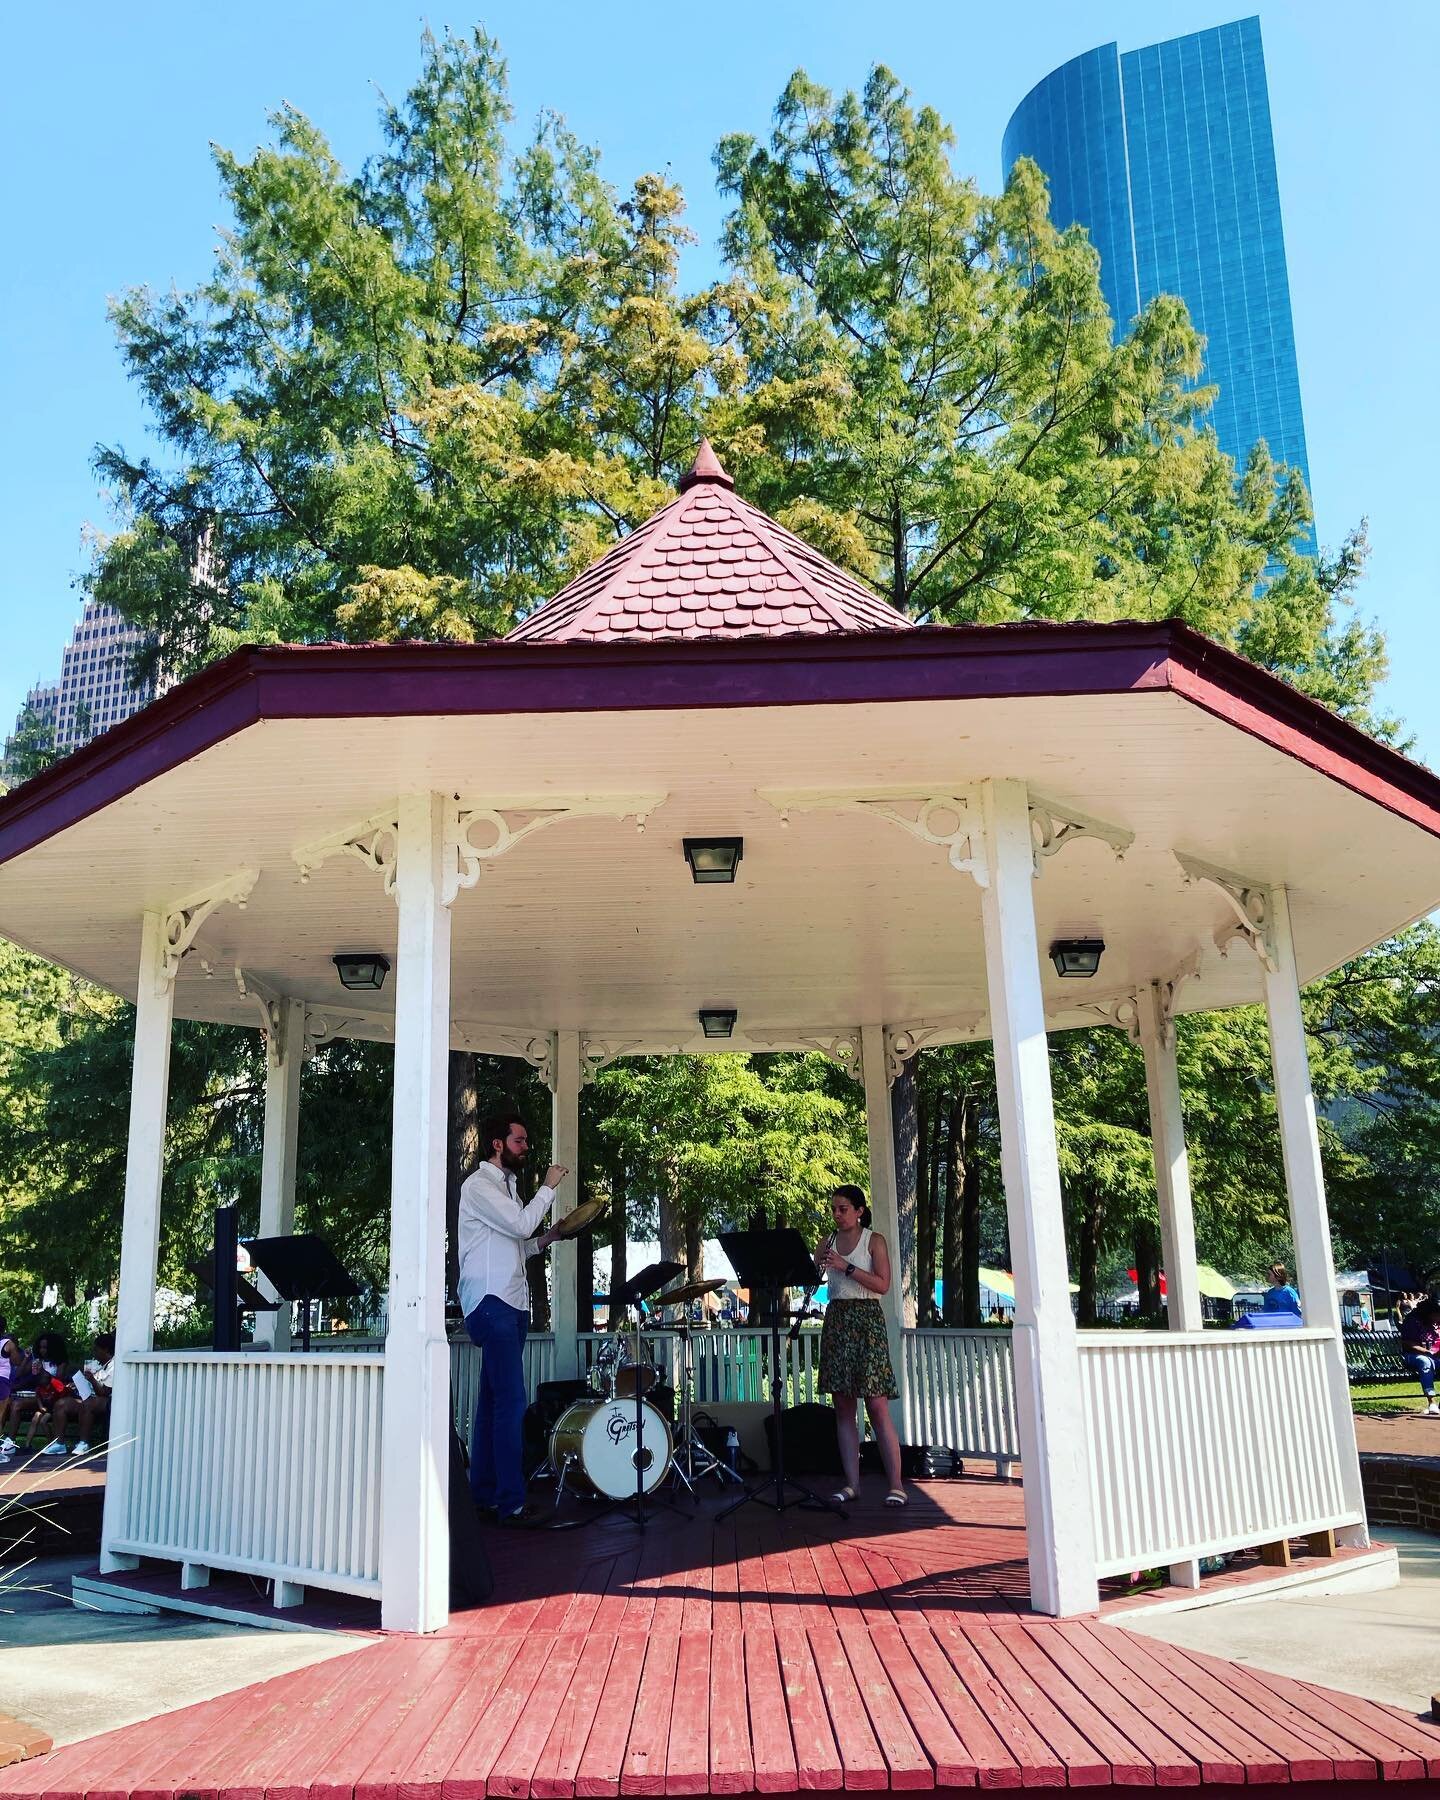 We are having a blast at the Bayou City Art Festival! If you missed us today, we are back here again tomorrow at 2:00pm at Sam Houston Park in the gazebo. 
.
.
#music #classicalmusic #classical